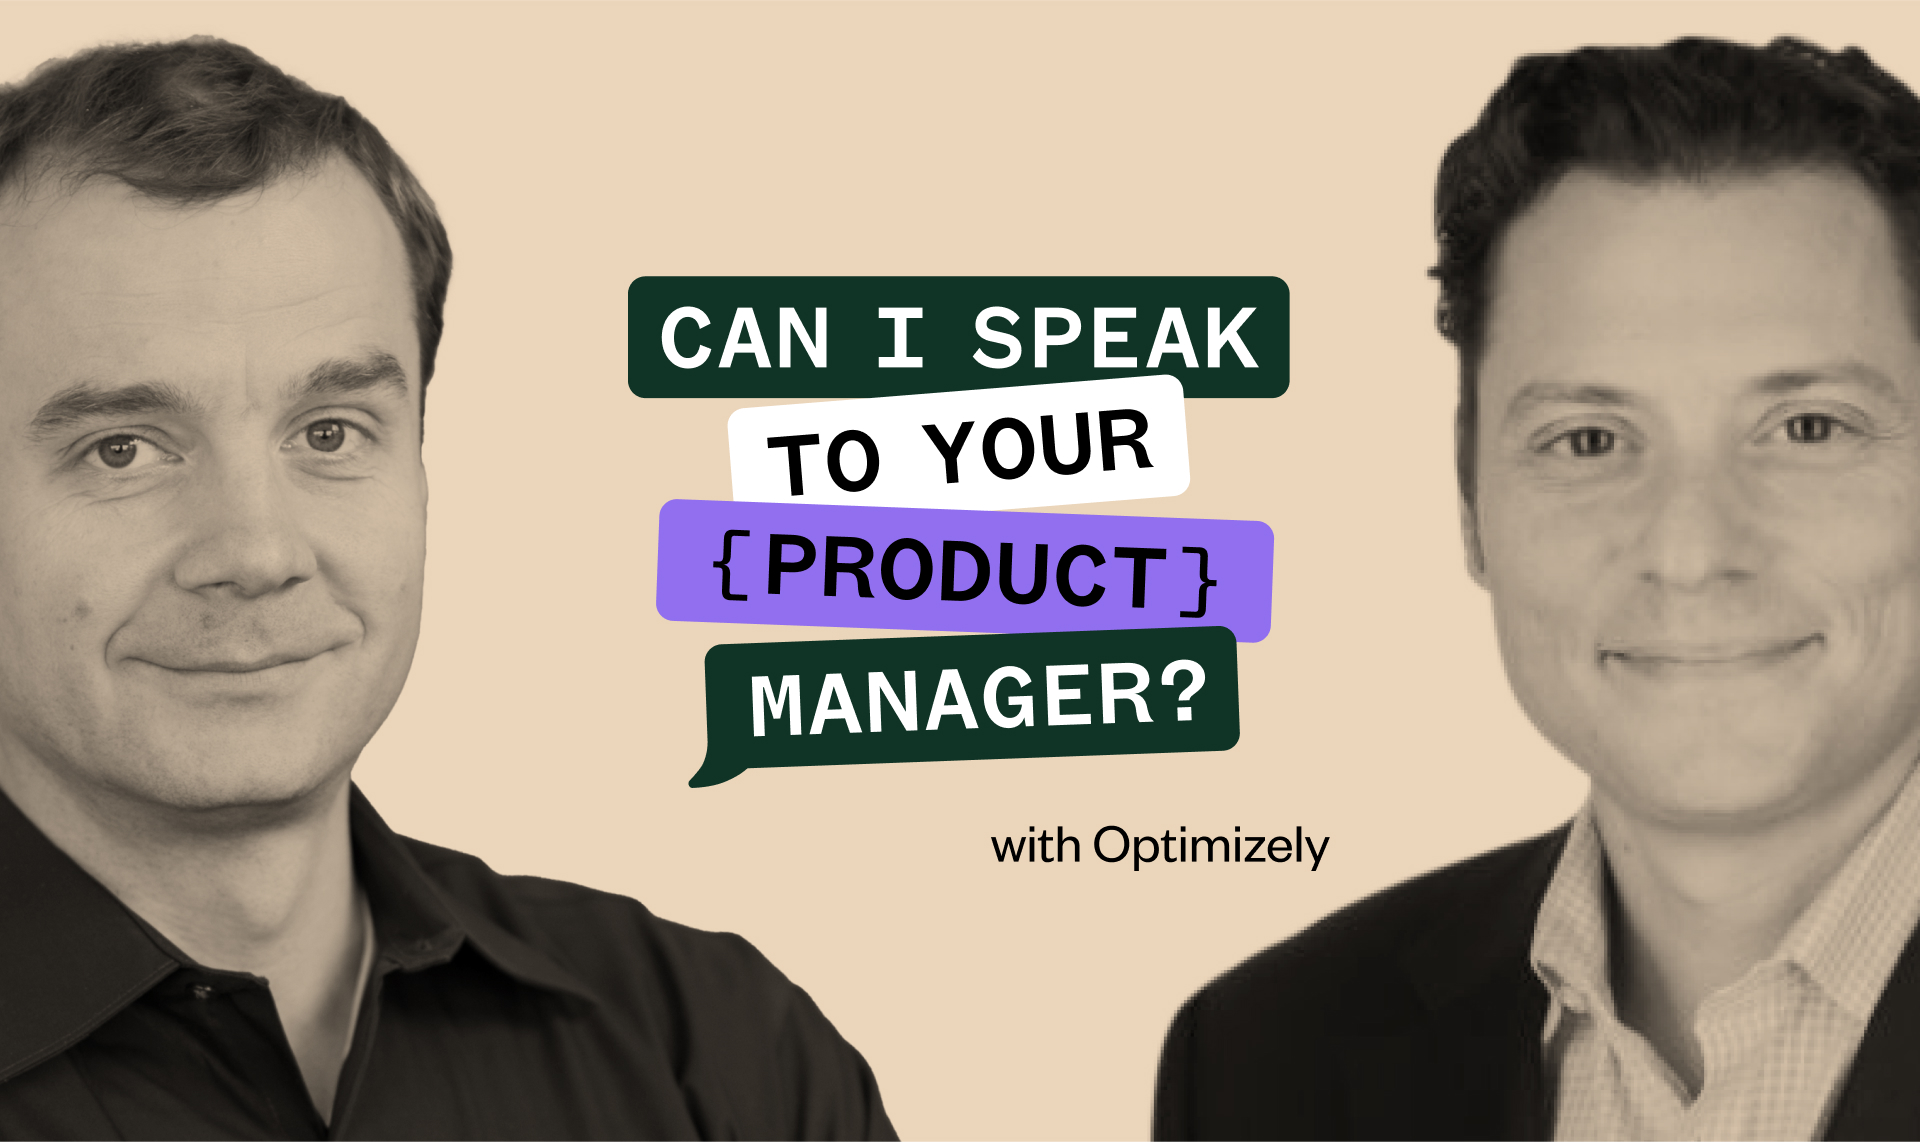 Two men in black shirts are featured in a promotional image for a podcast titled "Can I Speak to Your Product Manager?" with Optimizely. The title is displayed in a speech bubble graphic.